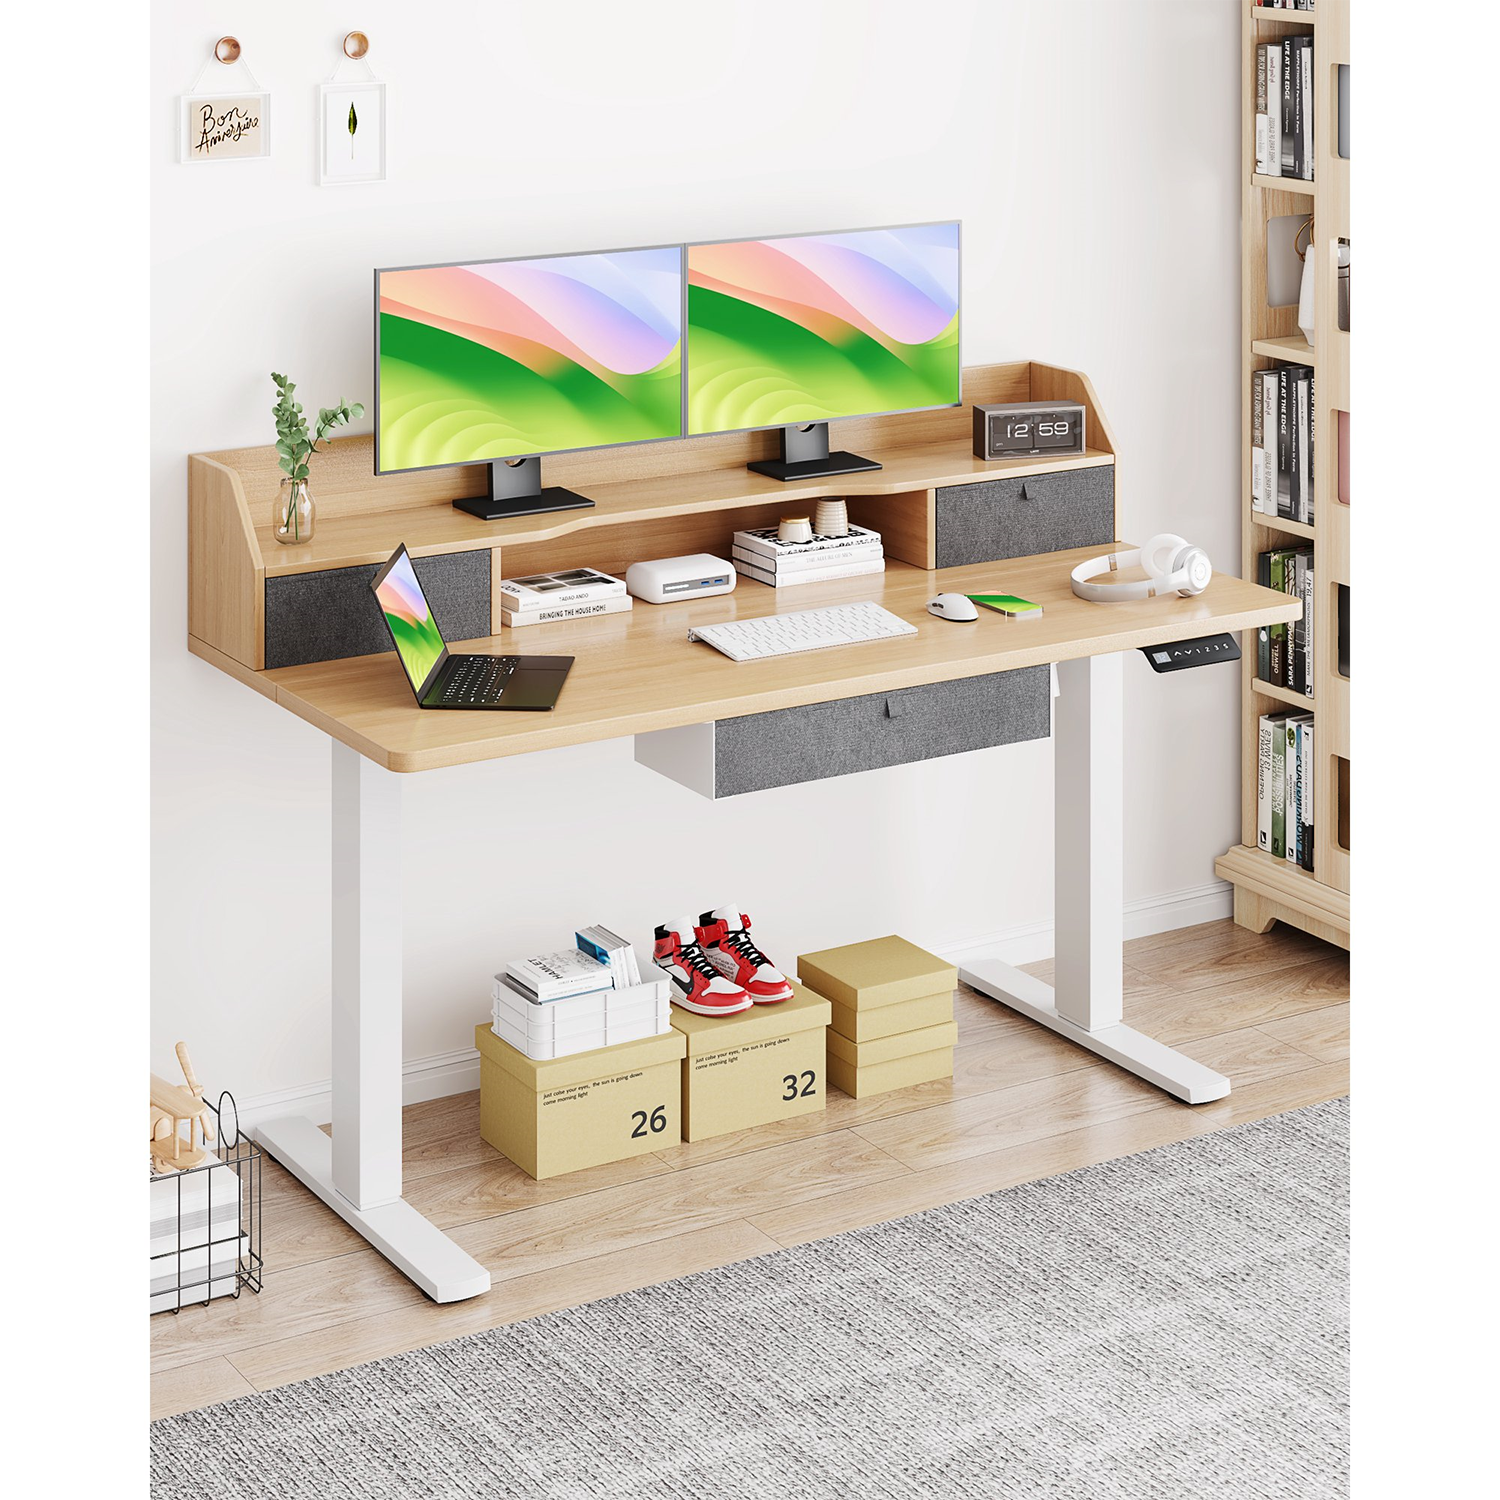 Vineego Electric Standing Desk Height Adjustable Office Desk with 55” x  27.5” Tabletop Home Office Workstation, Beige Finish 